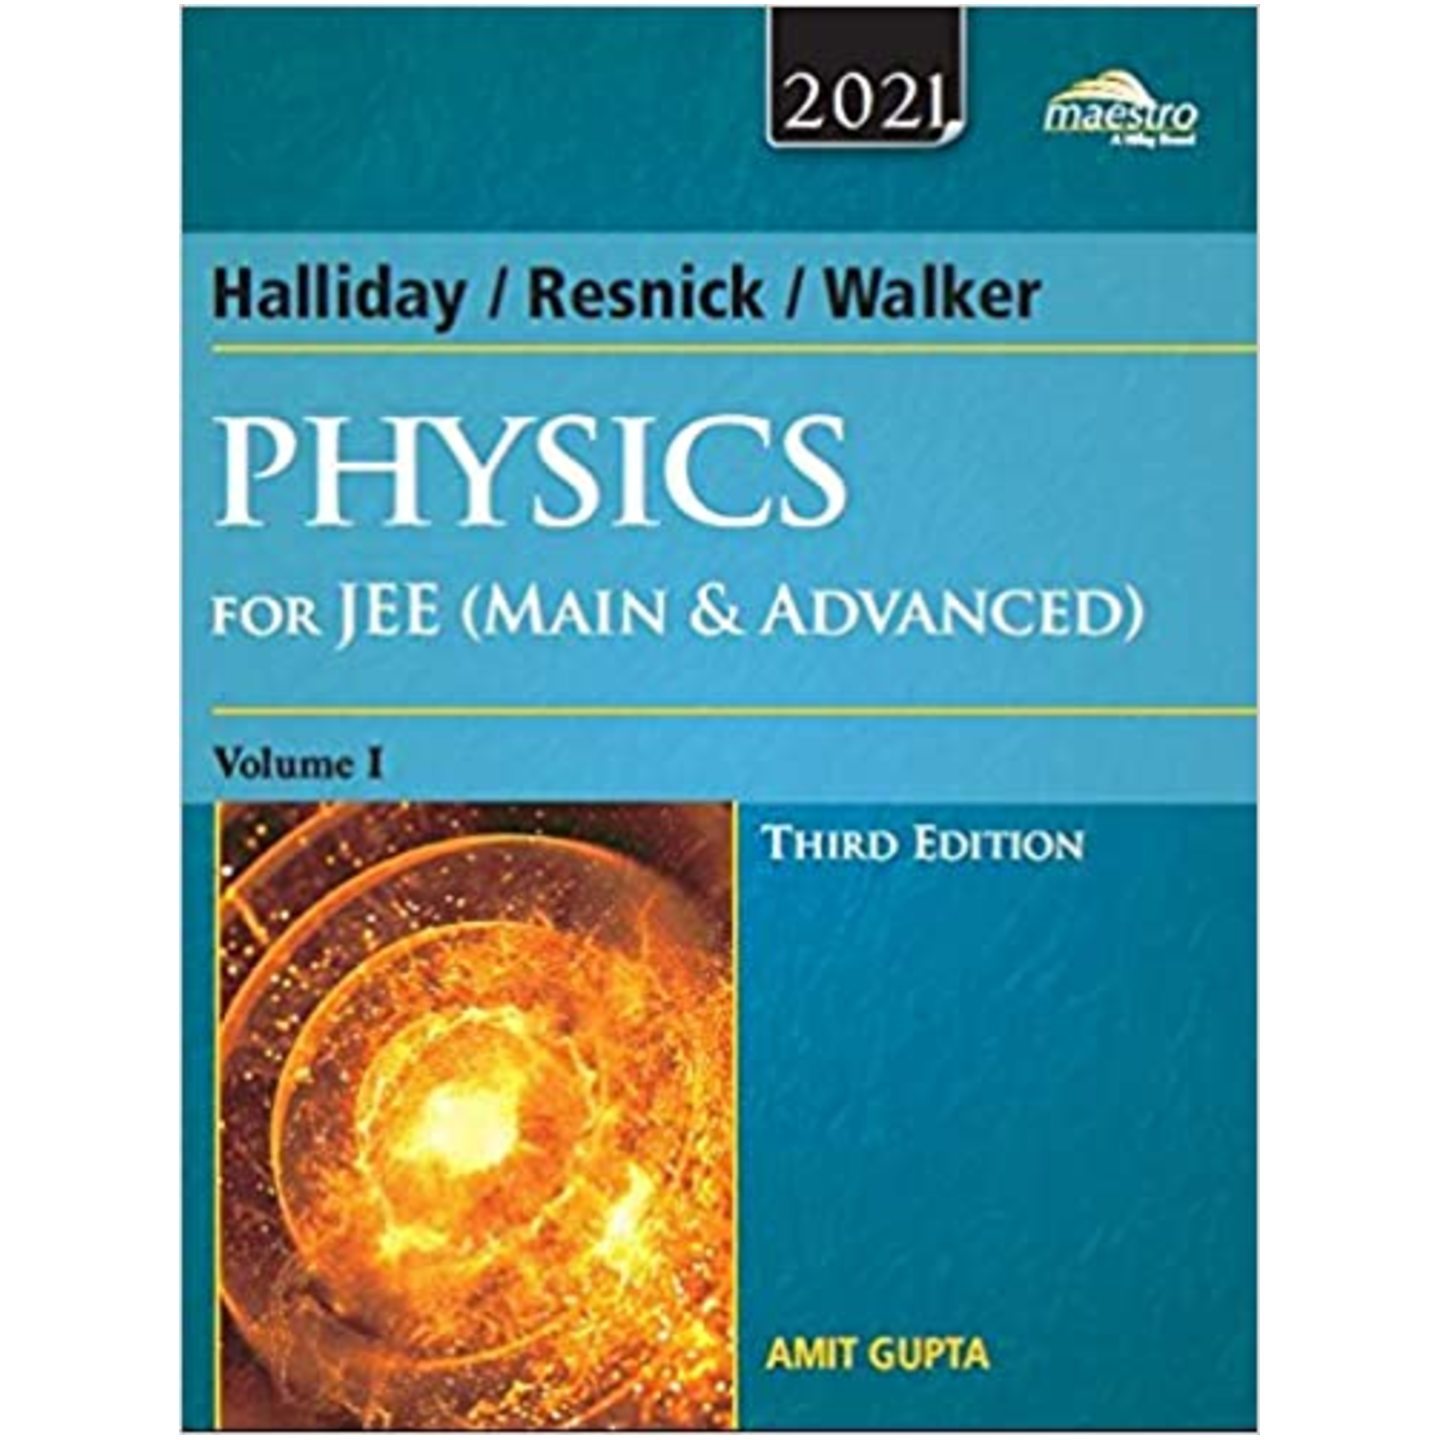 Wileys Halliday  Resnick  Walker Physics for JEE Main & Advanced, Vol I